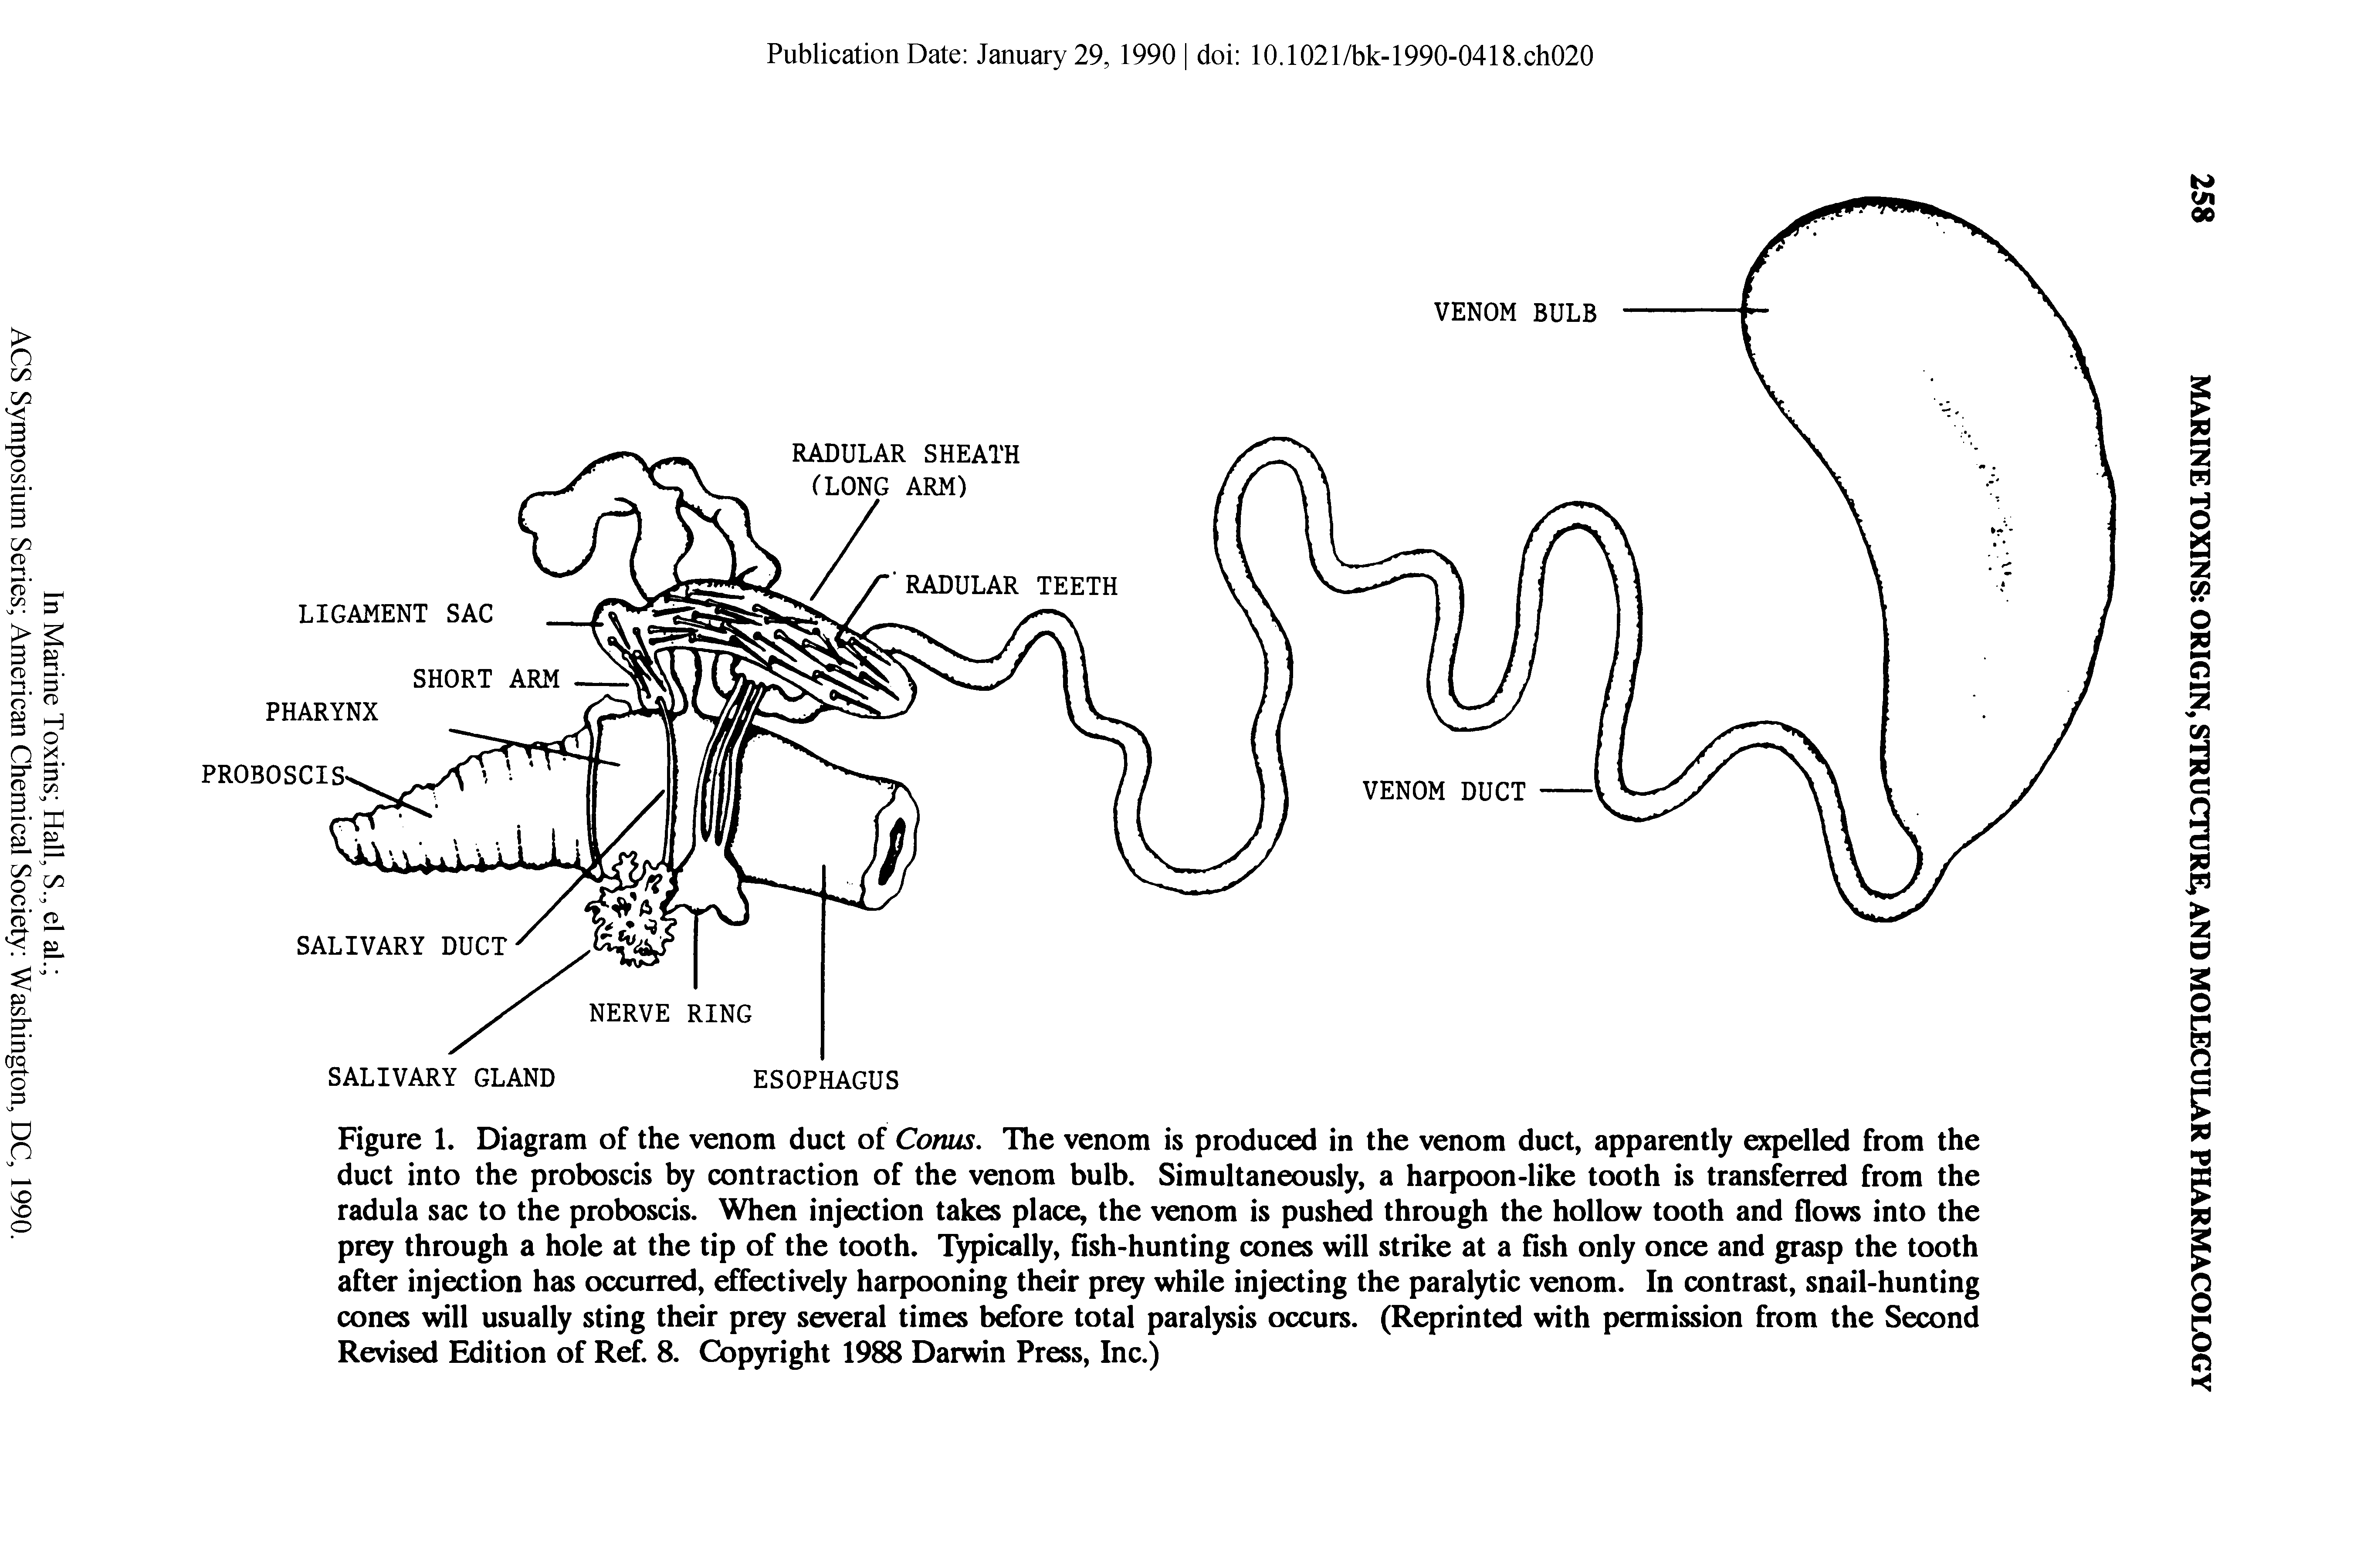 Figure 1. Diagram of the venom duct of Conus. The venom is produced in the venom duct, apparently expelled from the duct into the proboscis by contraction of the venom bulb. Simultaneously, a harpoon-like tooth is transferred from the radula sac to the proboscis. When injection takes place, the venom is pushed through the hollow tooth and flows into the prey through a hole at the tip of the tooth. Typically, fish-hunting cones will strike at a fish only once and grasp the tooth after injection has occurred, effectively harpooning their prey while injecting the paralytic venom. In contrast, snail-hunting cones will usually sting their prey several times before total paralysis occurs. (Reprinted with permission from the Second Revised Edition of Ref. 8. Copyright 1988 Darwin Press, Inc.)...